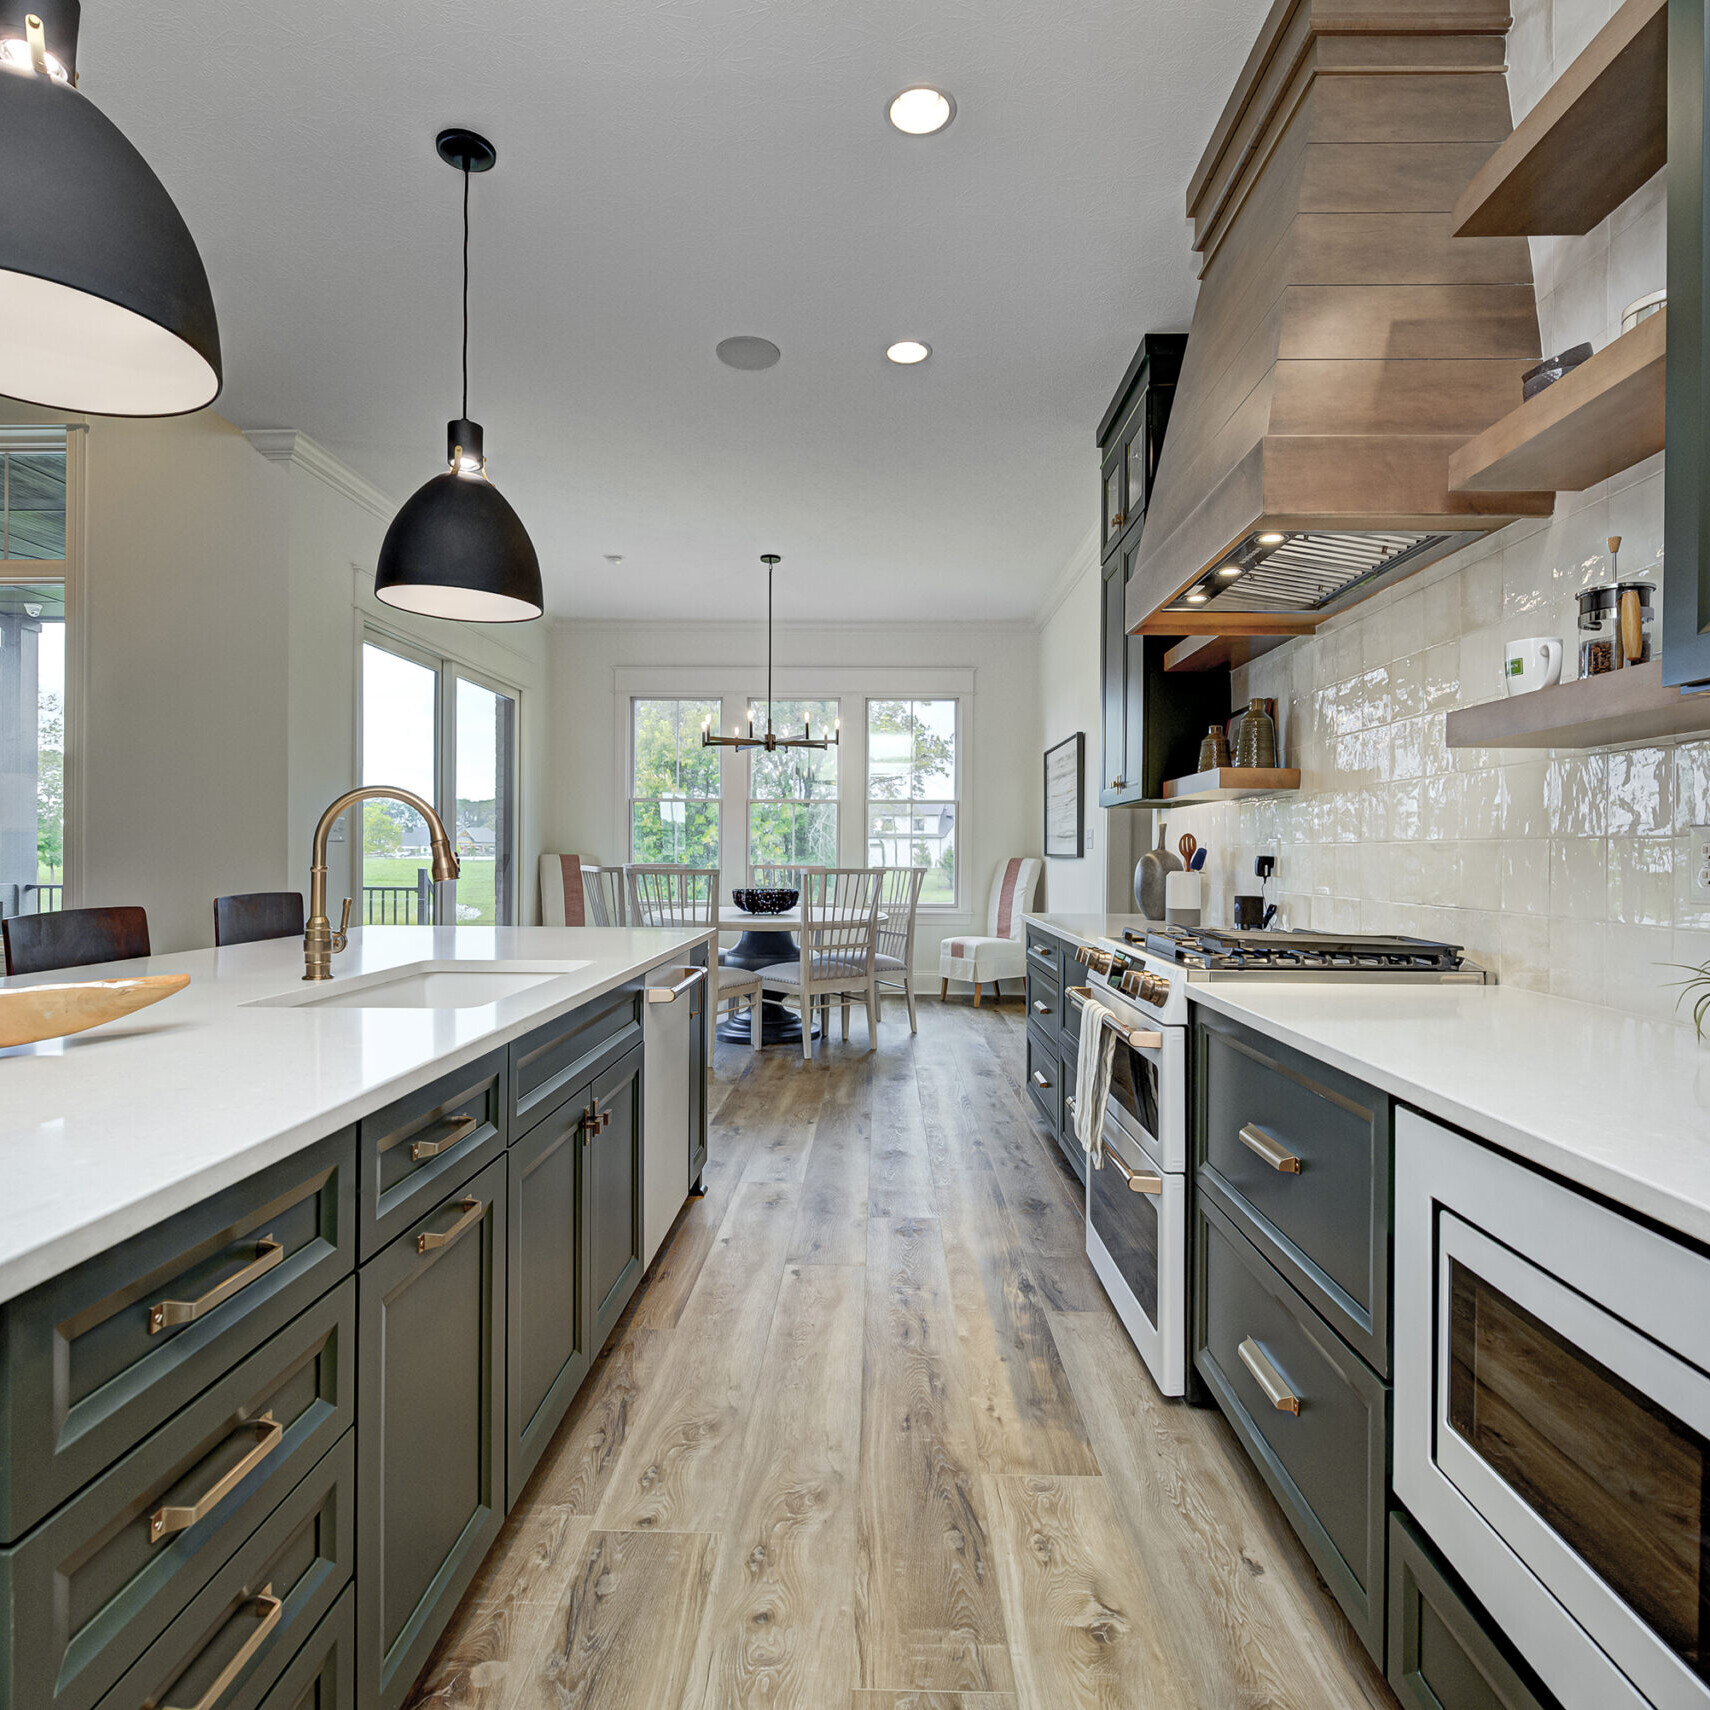 A kitchen with green cabinets and hardwood floors in a custom-built home.